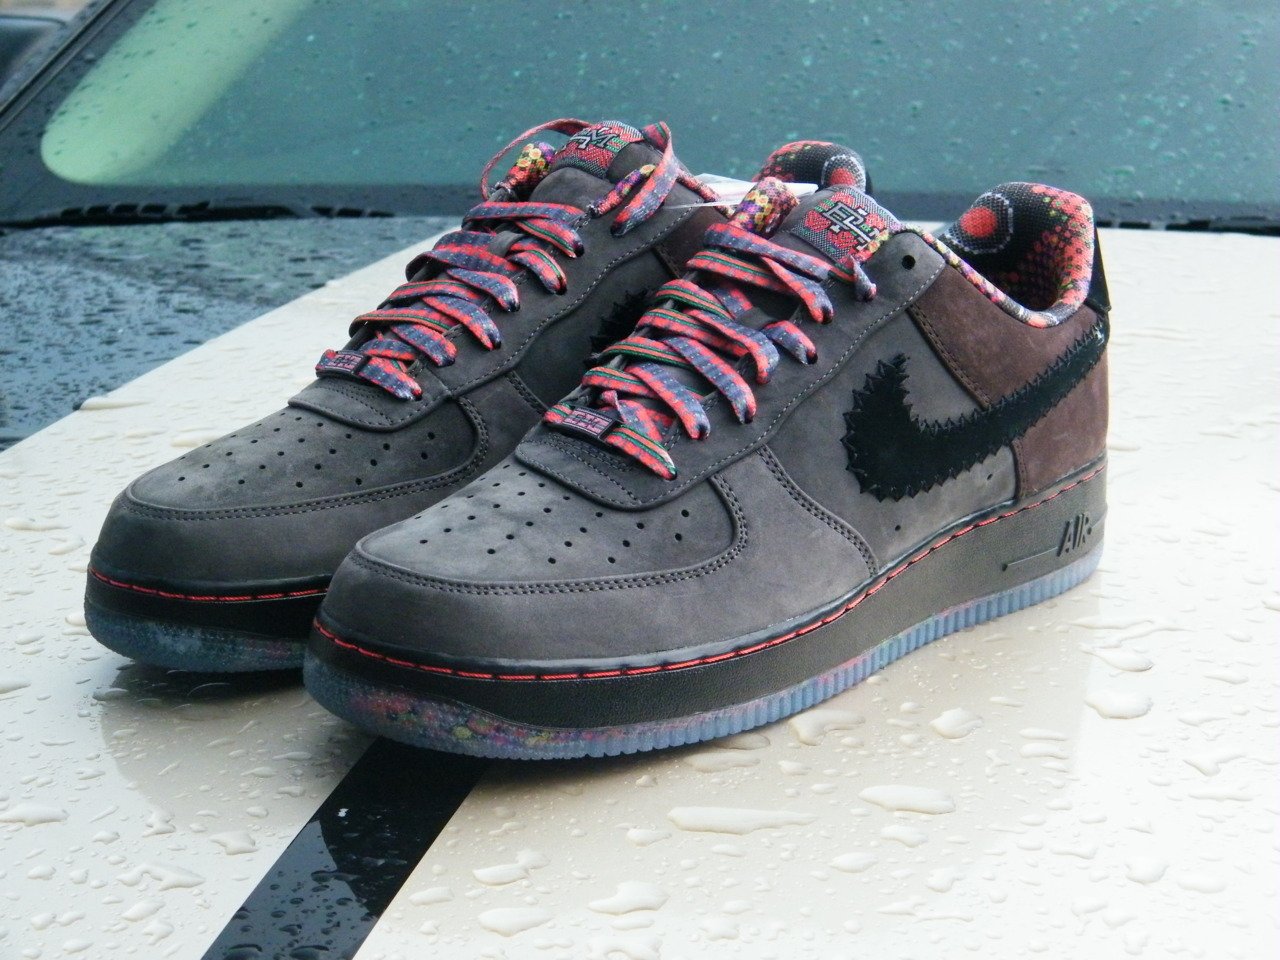 nike air force 1 low size 6.5